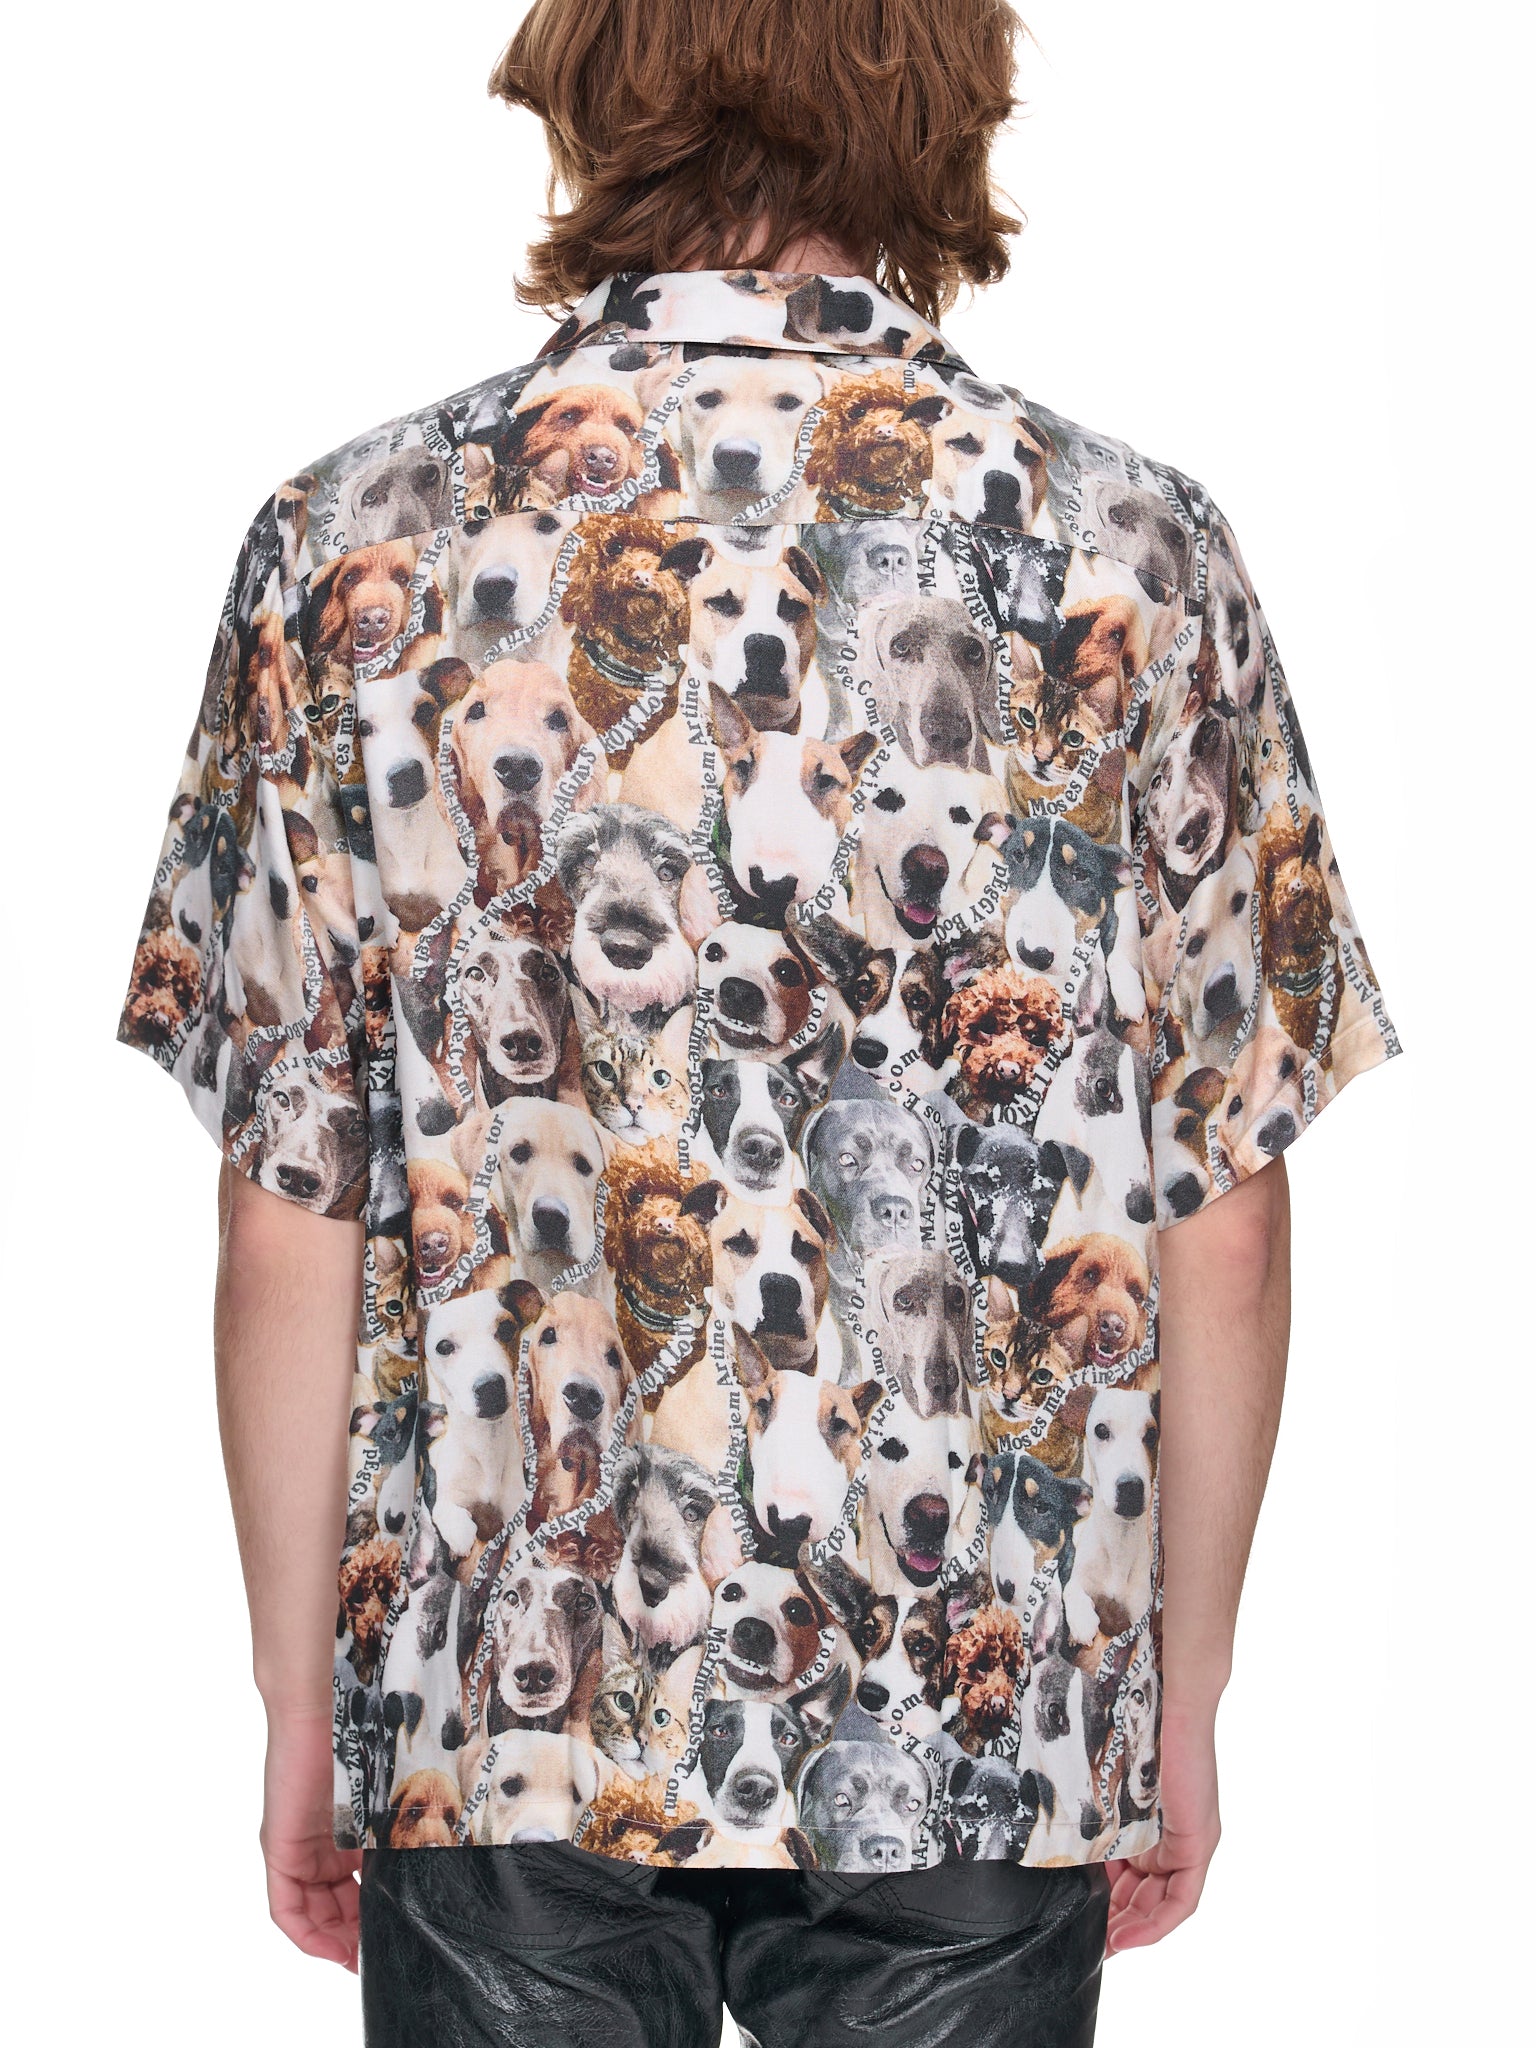 Cats Dogs Shirt (MR421-MRS-CATS-DOGS)